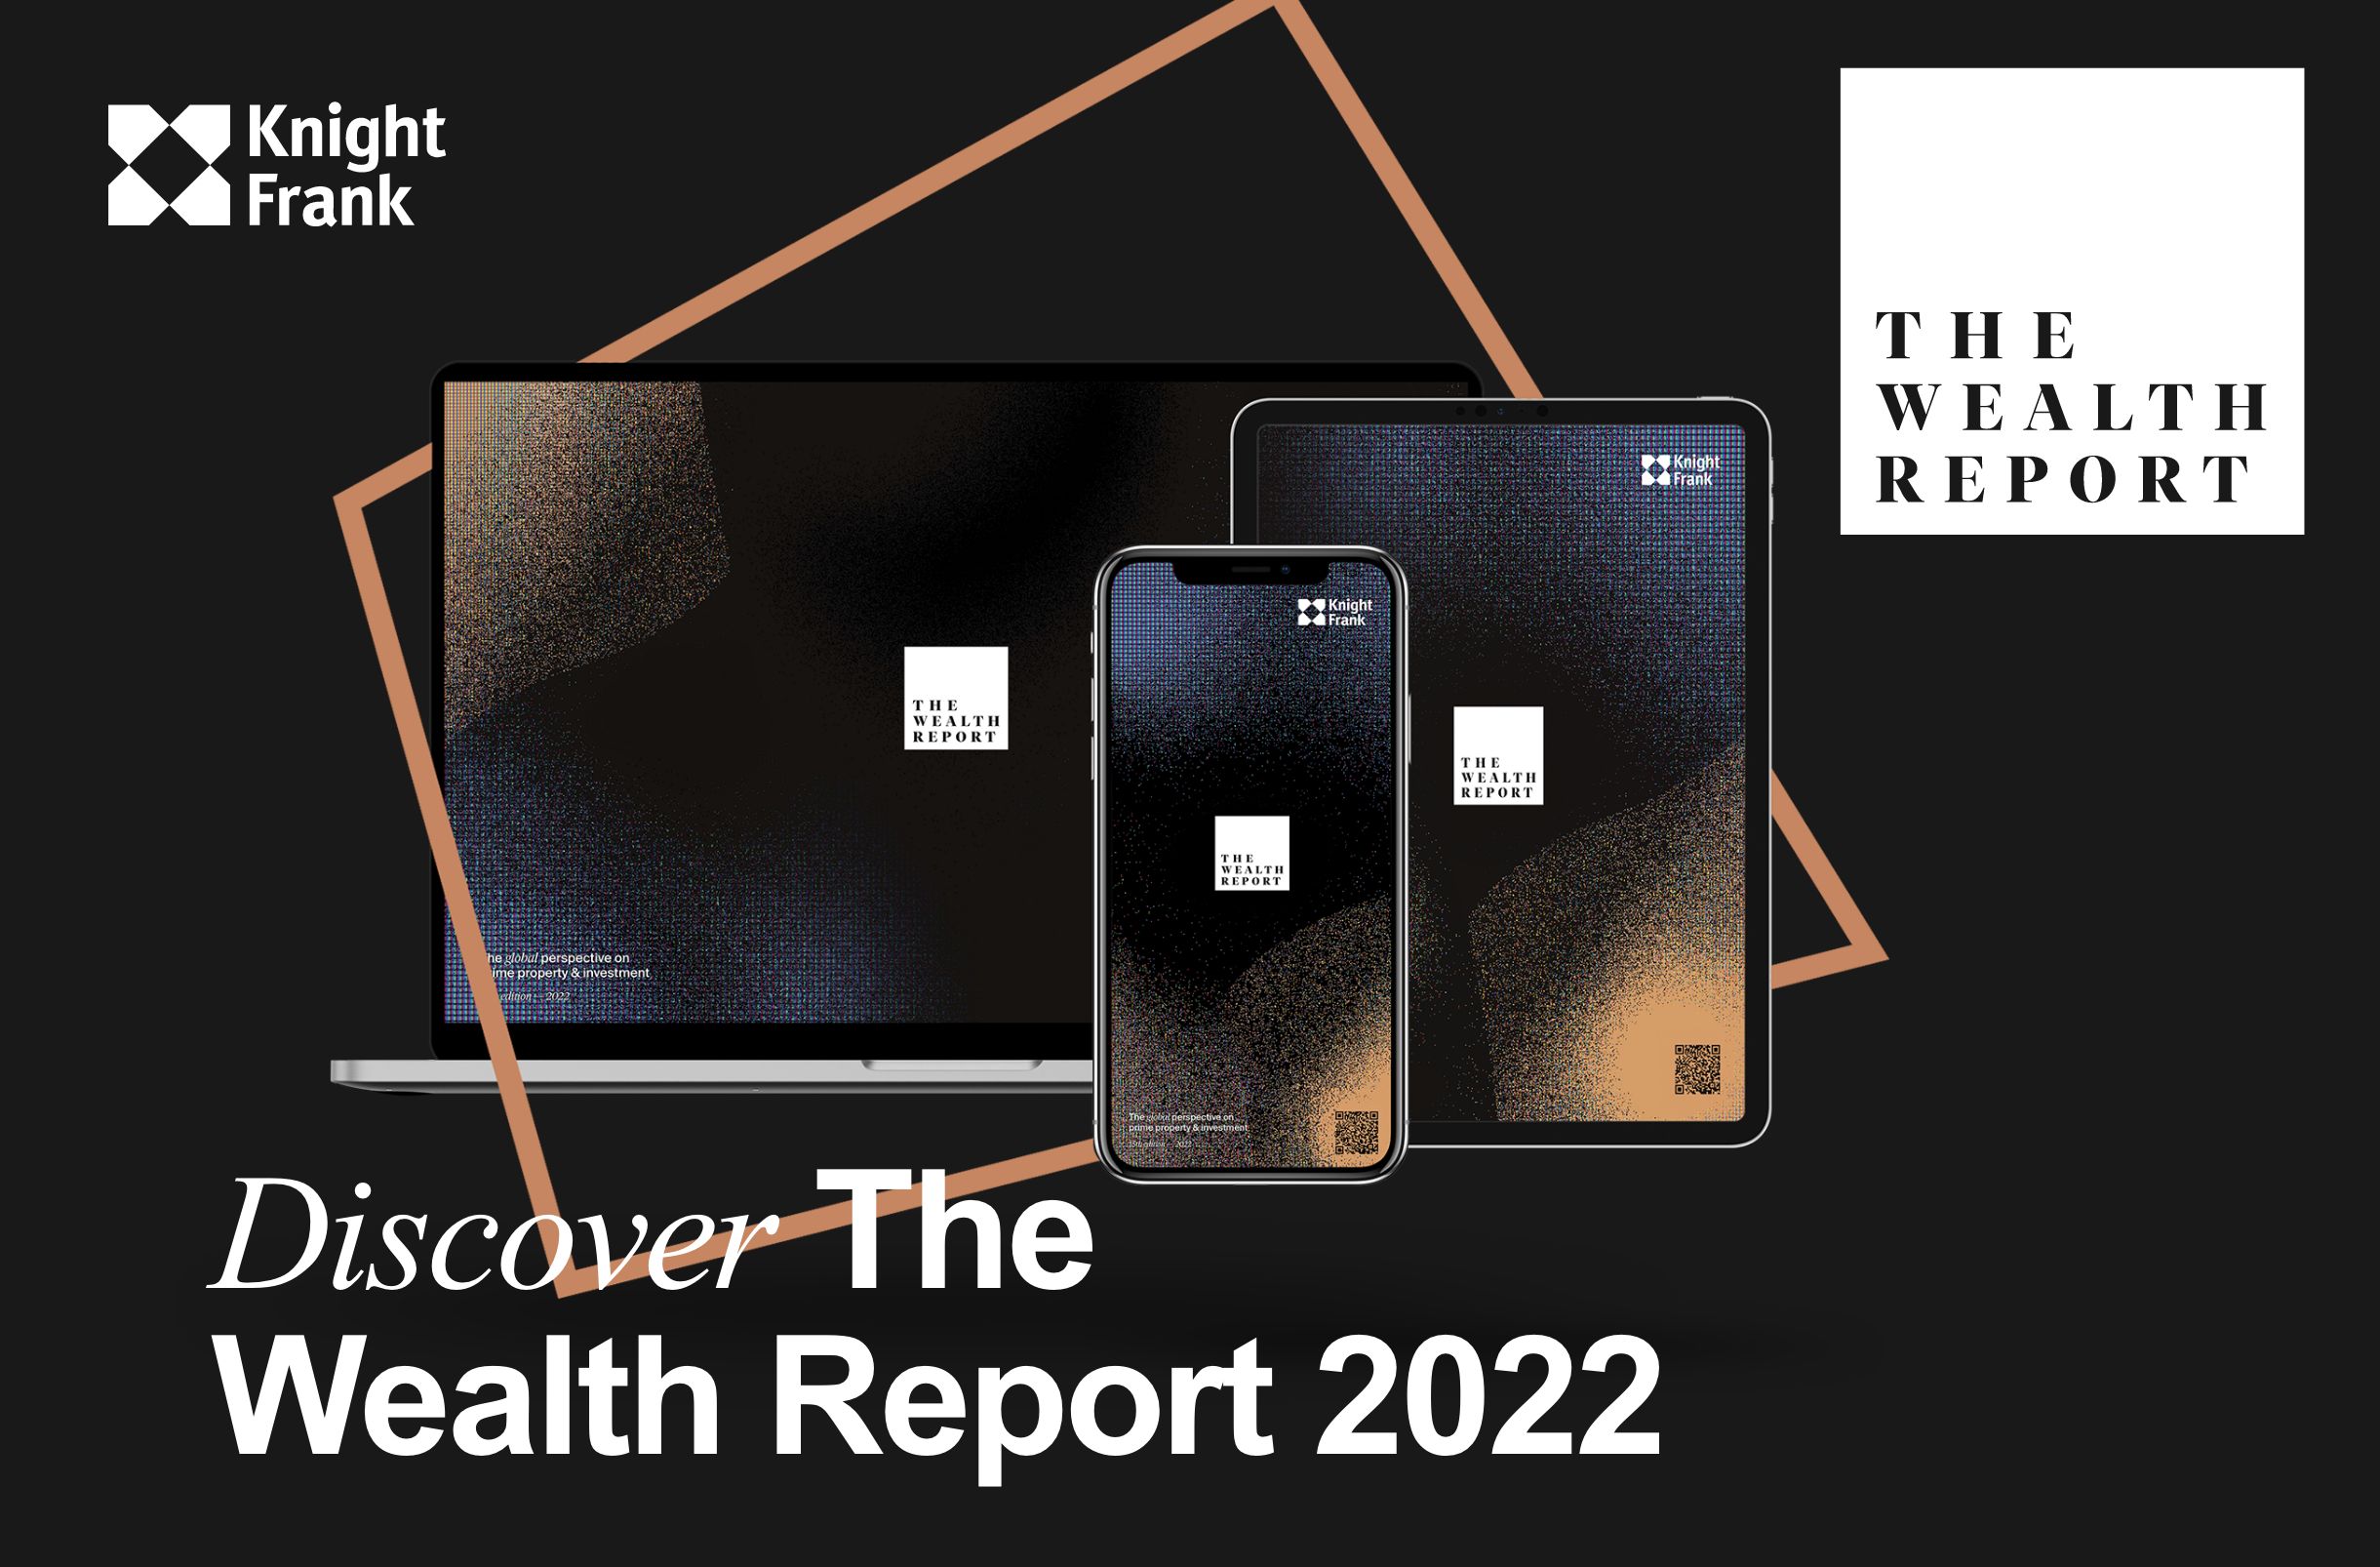 Knight Frank - Discover The Wealth Report 2022